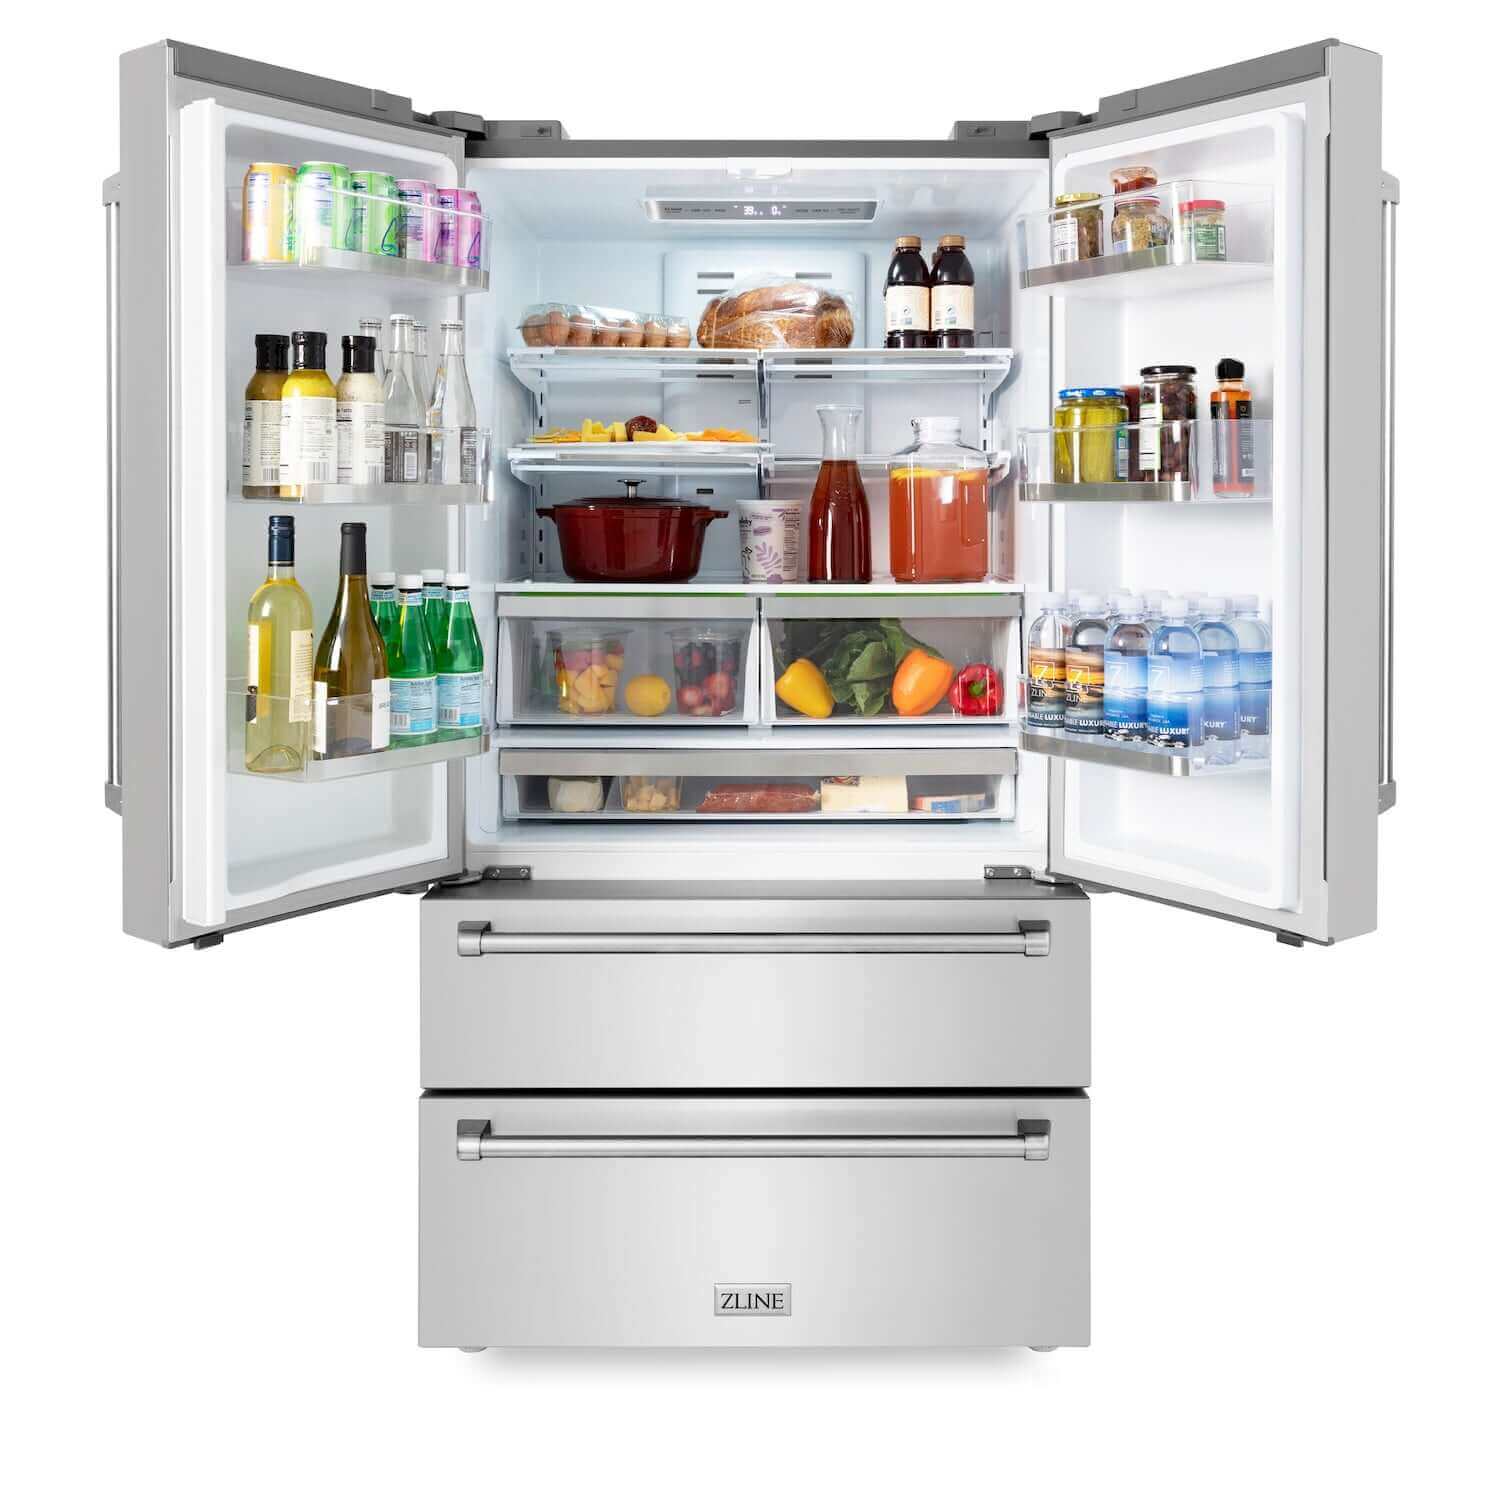 ZLINE 36 in. Freestanding French Door Refrigerator with Doors Open with Food Inside and LED Lights Activated.